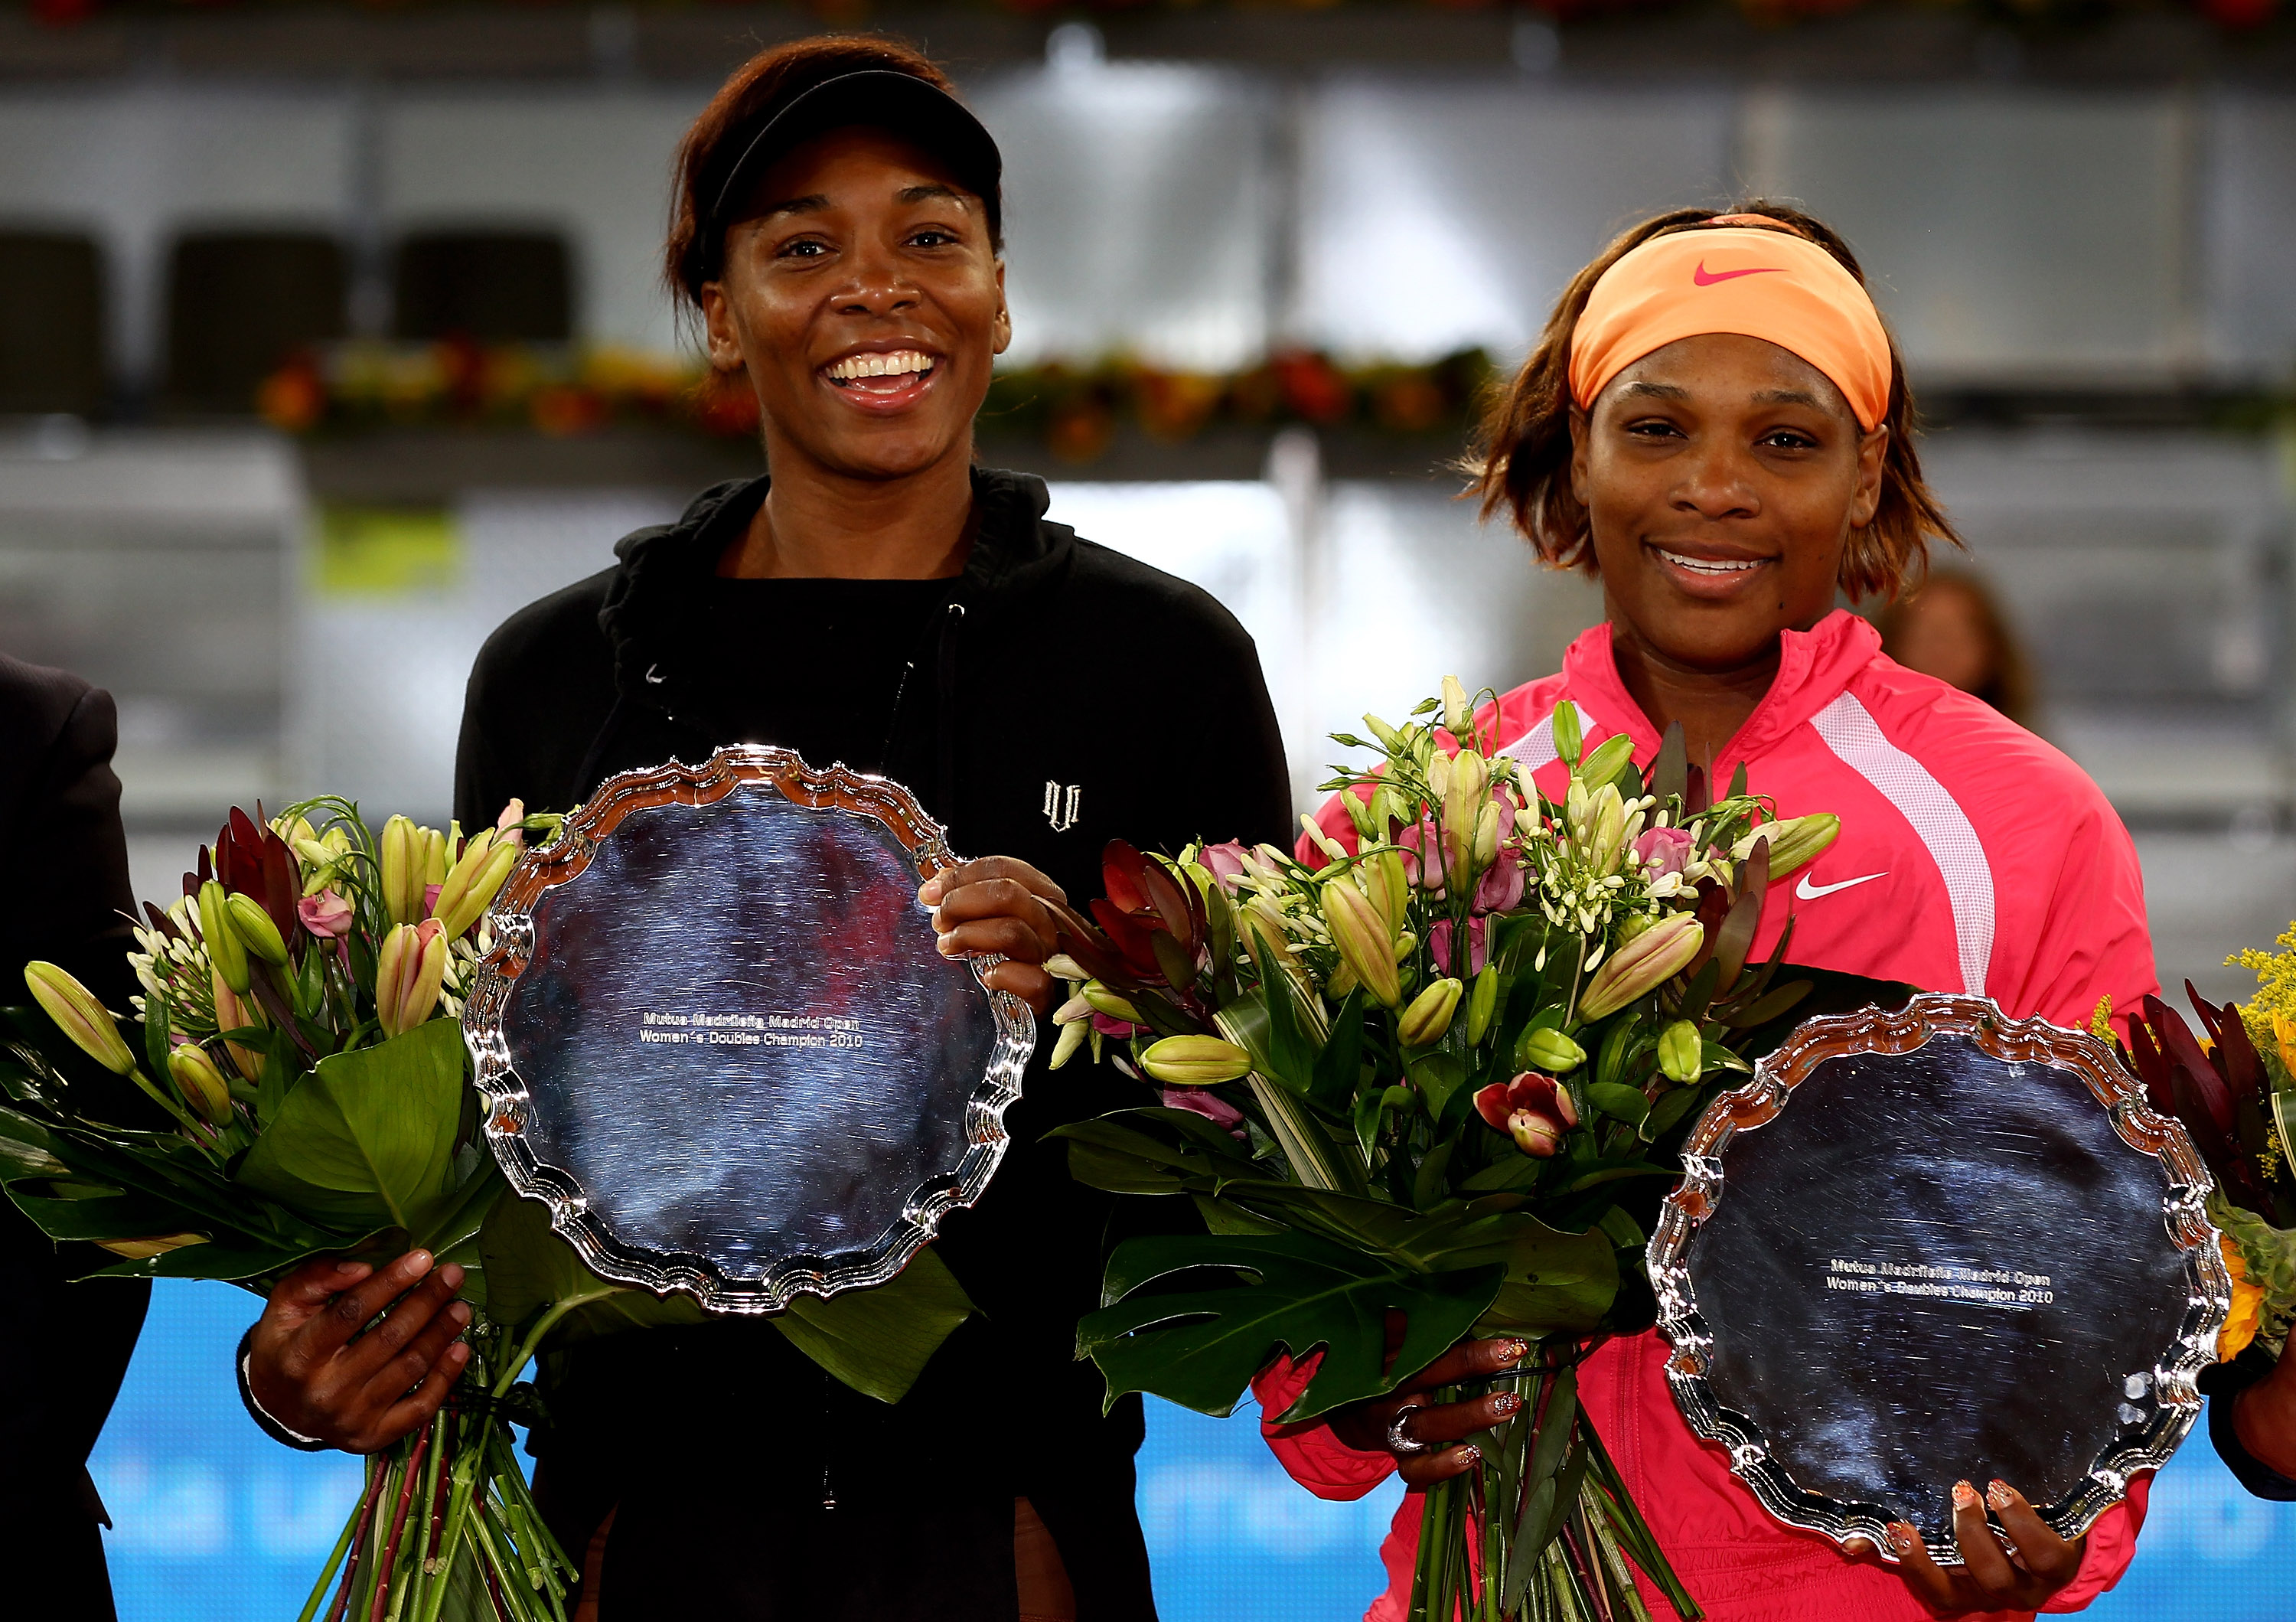 MADRID, SPAIN - MAY 15:  Venus Williams and Serena Williams of the USA hold their trophies after a straight sets victory against Gisela Dulko of Argentina and Flavia Pannetta of Italy in womens doubles final match during the Mutua Madrilena Madrid Open te